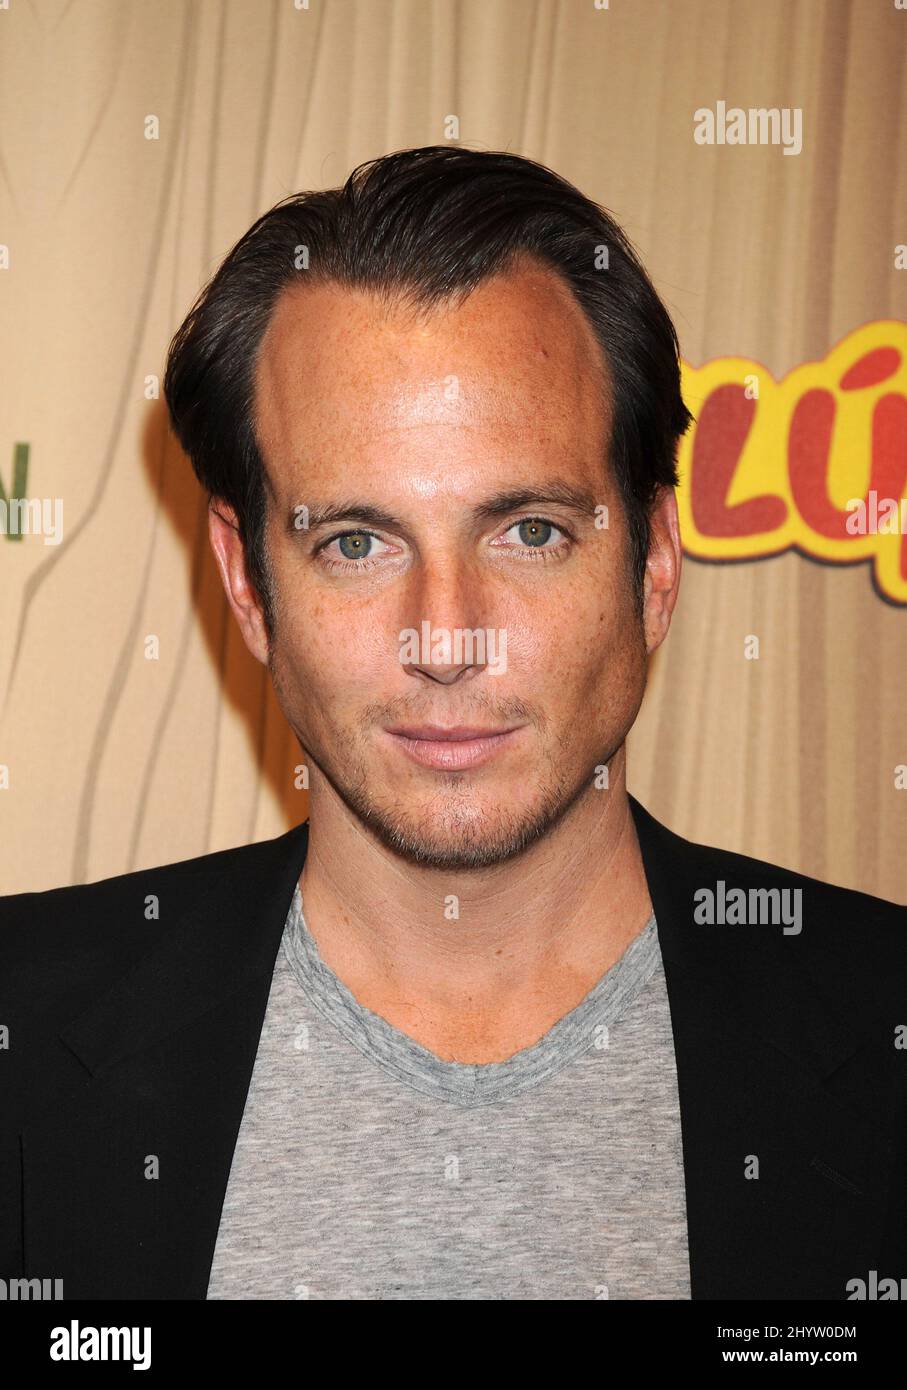 Will Arnett at the Kahlua celebration of the Premiere of NBC's "Parks & Recreation" at MyHouse, Hollywood Stock Photo